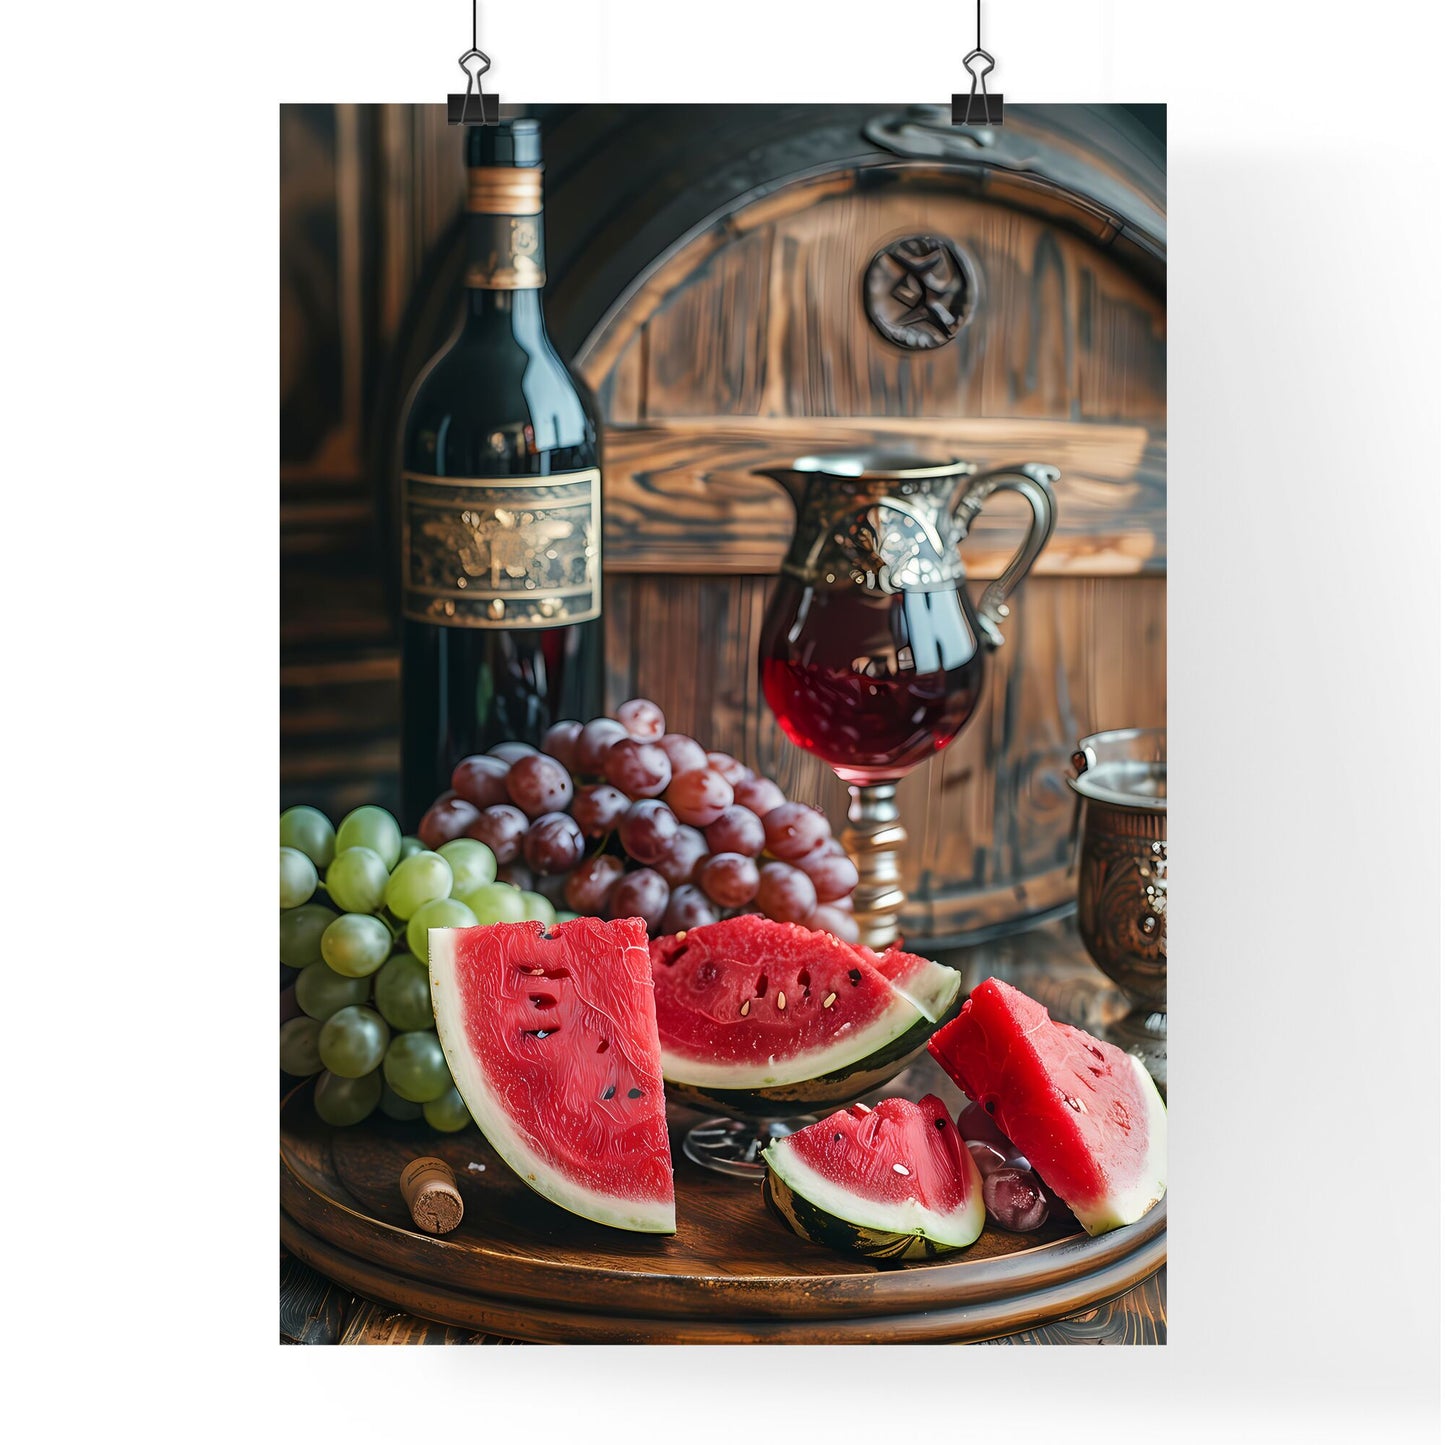 Enticing Fruit Art: Captivating Painting of Watermelon Slices and Grapes on Antique Table Default Title